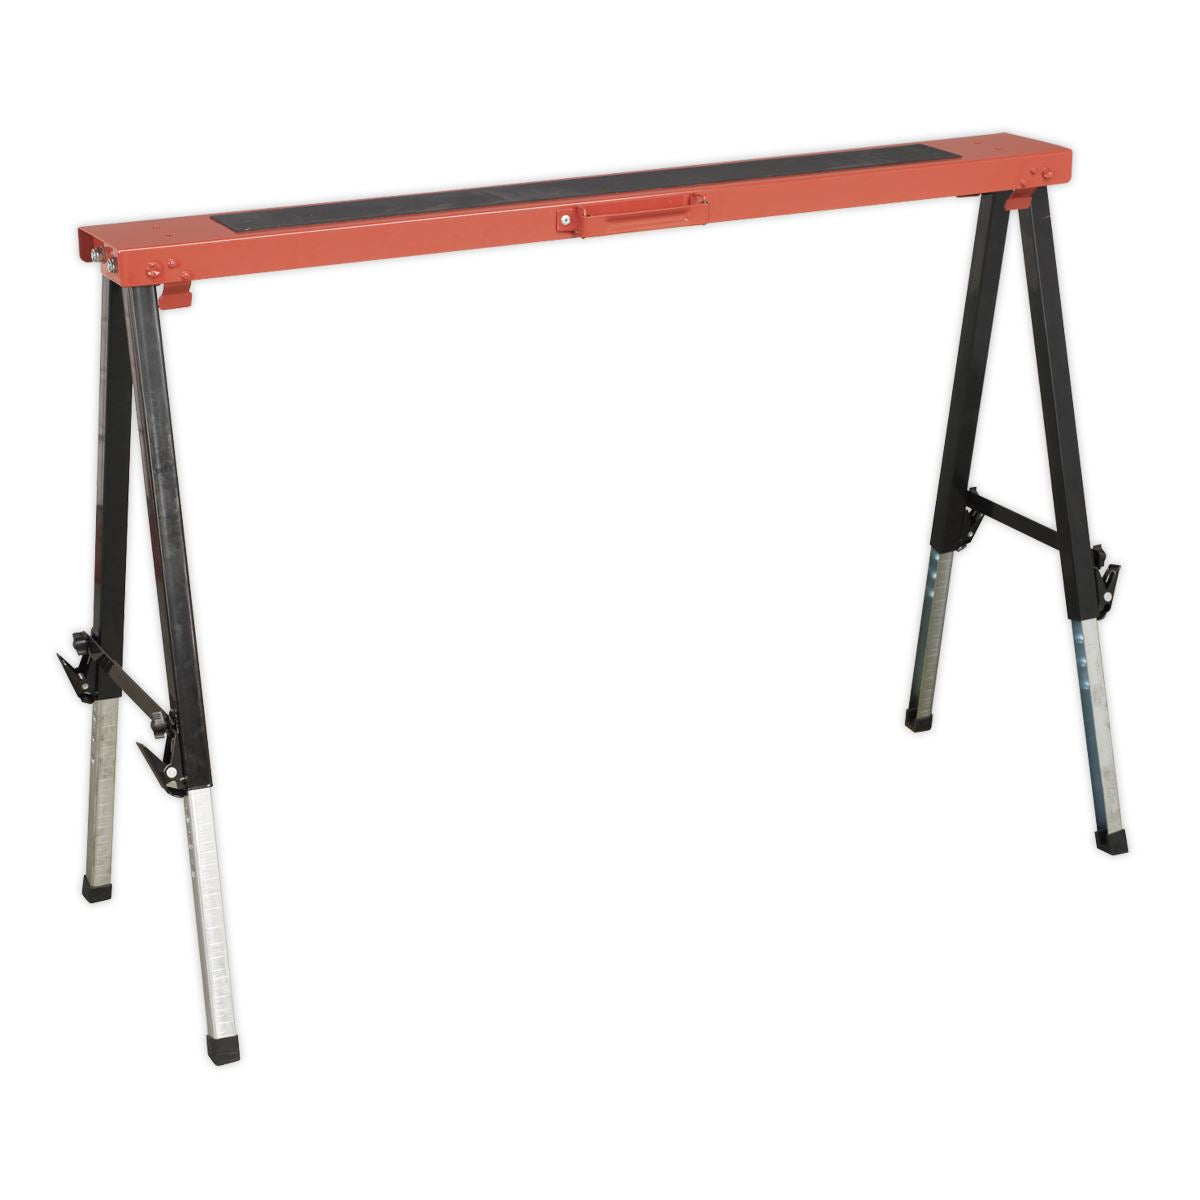 Sealey Fold Down Trestle with Adjustable Legs 150kg Capacity